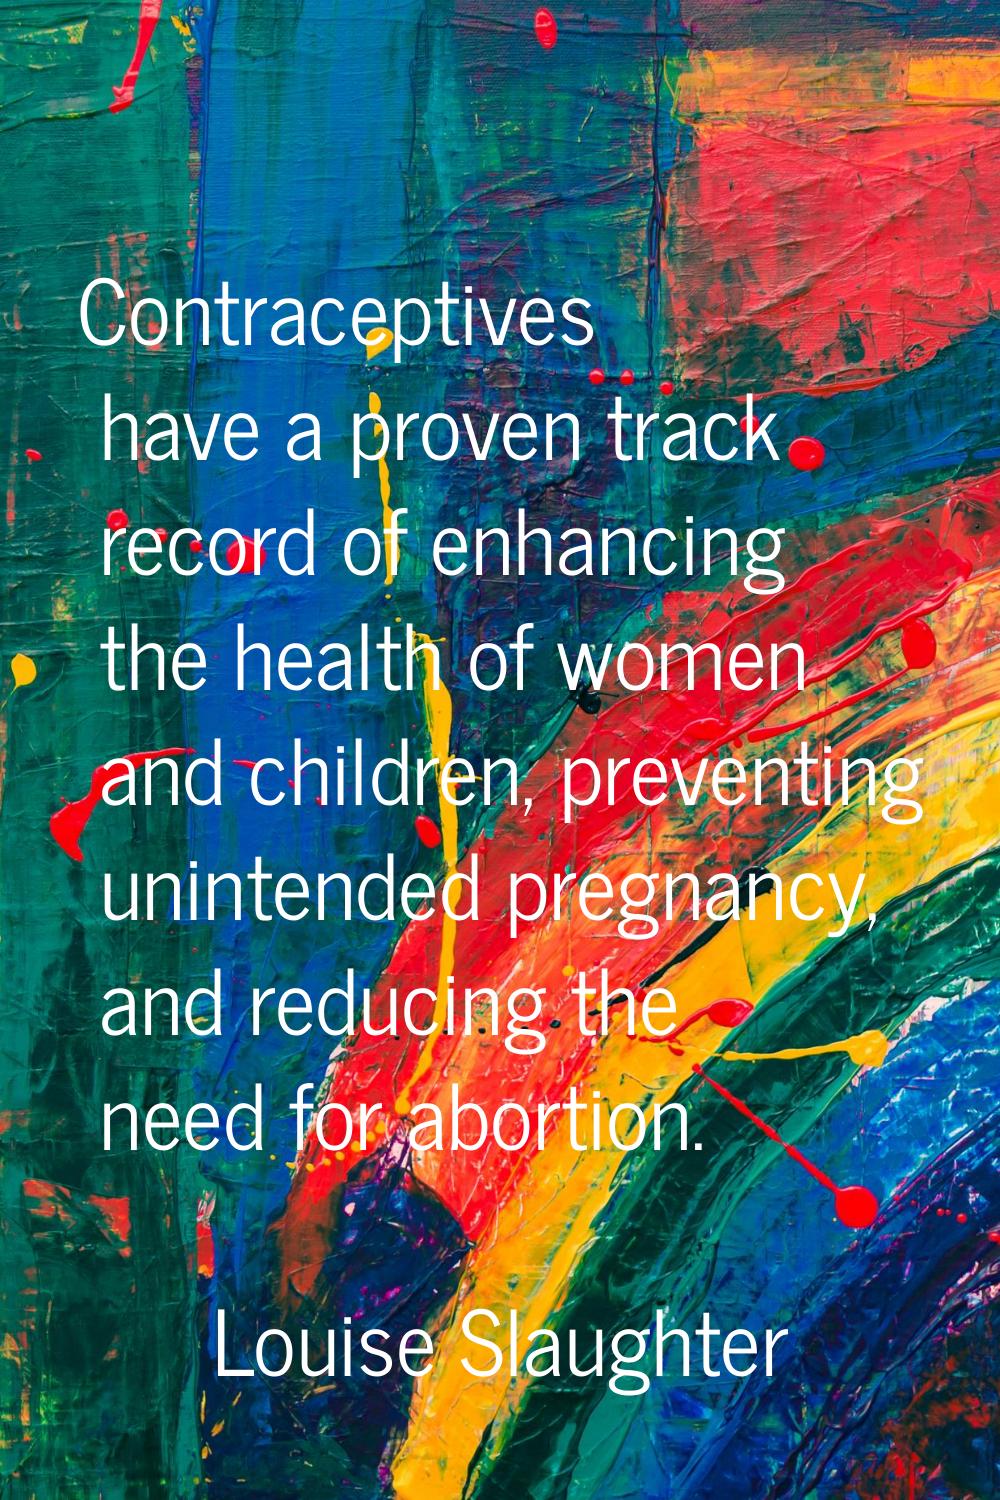 Contraceptives have a proven track record of enhancing the health of women and children, preventing